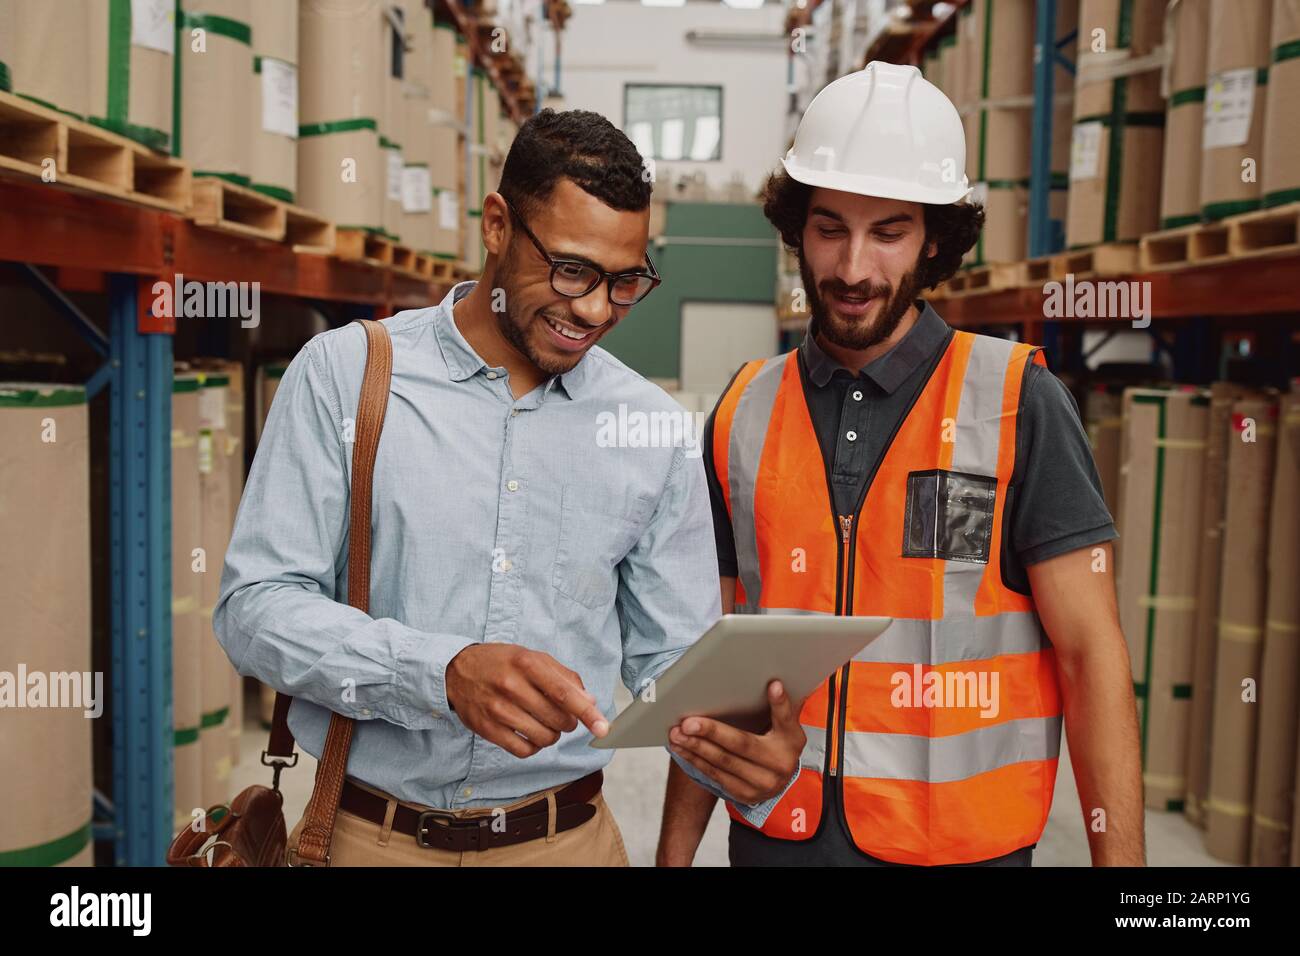 Young businessman showing data in touchpad to warehouse worker wearing hardhat and orange jacket uniform Stock Photo